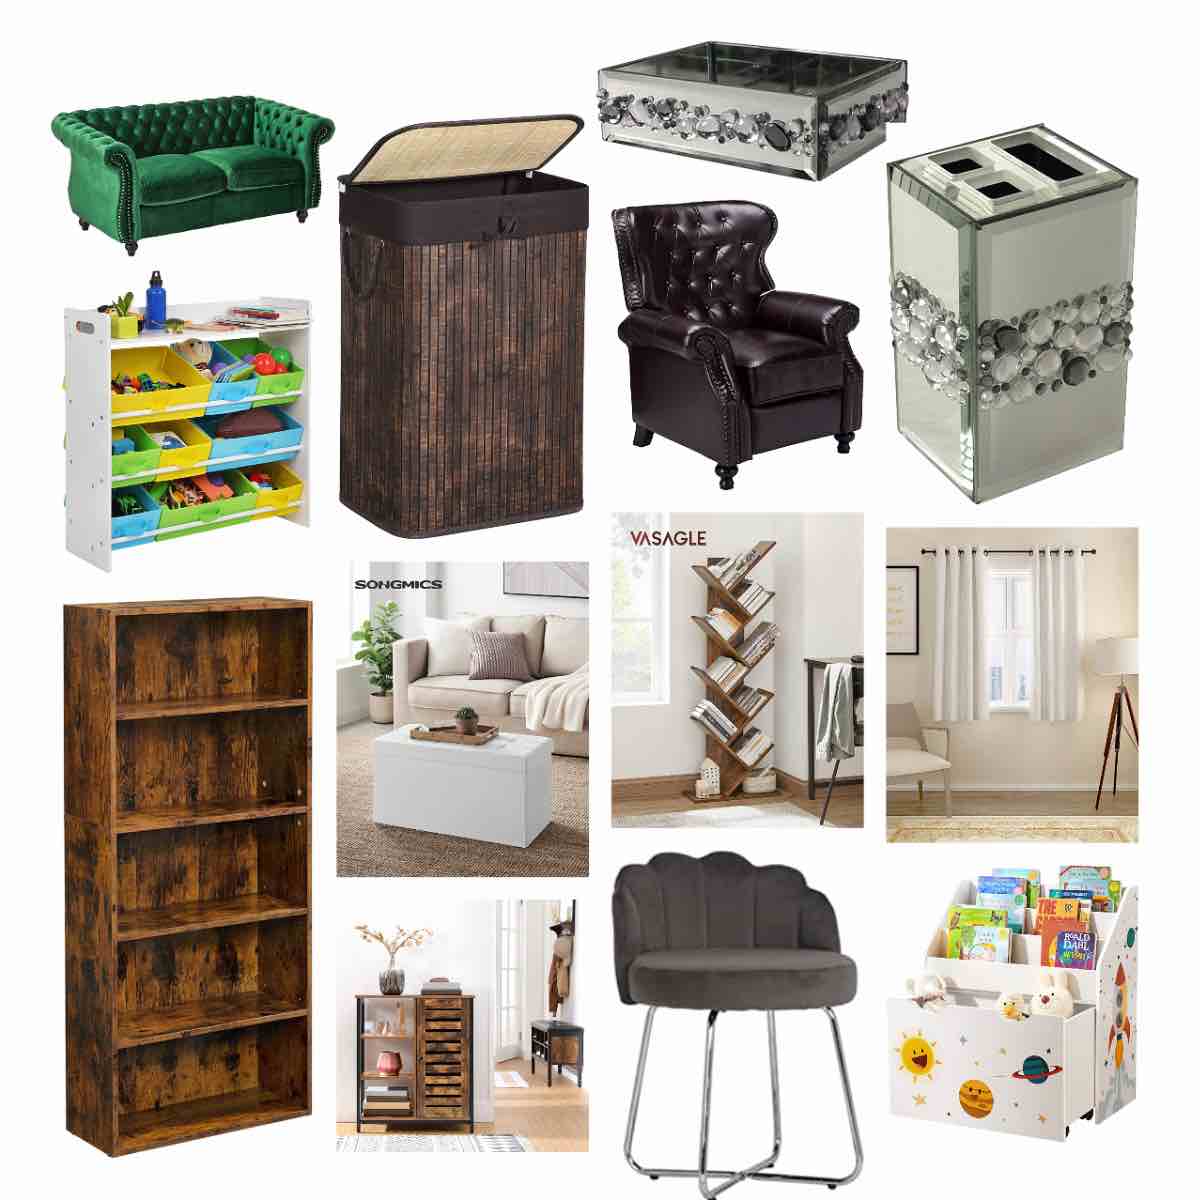 Up to 60% off furniture and decor finds